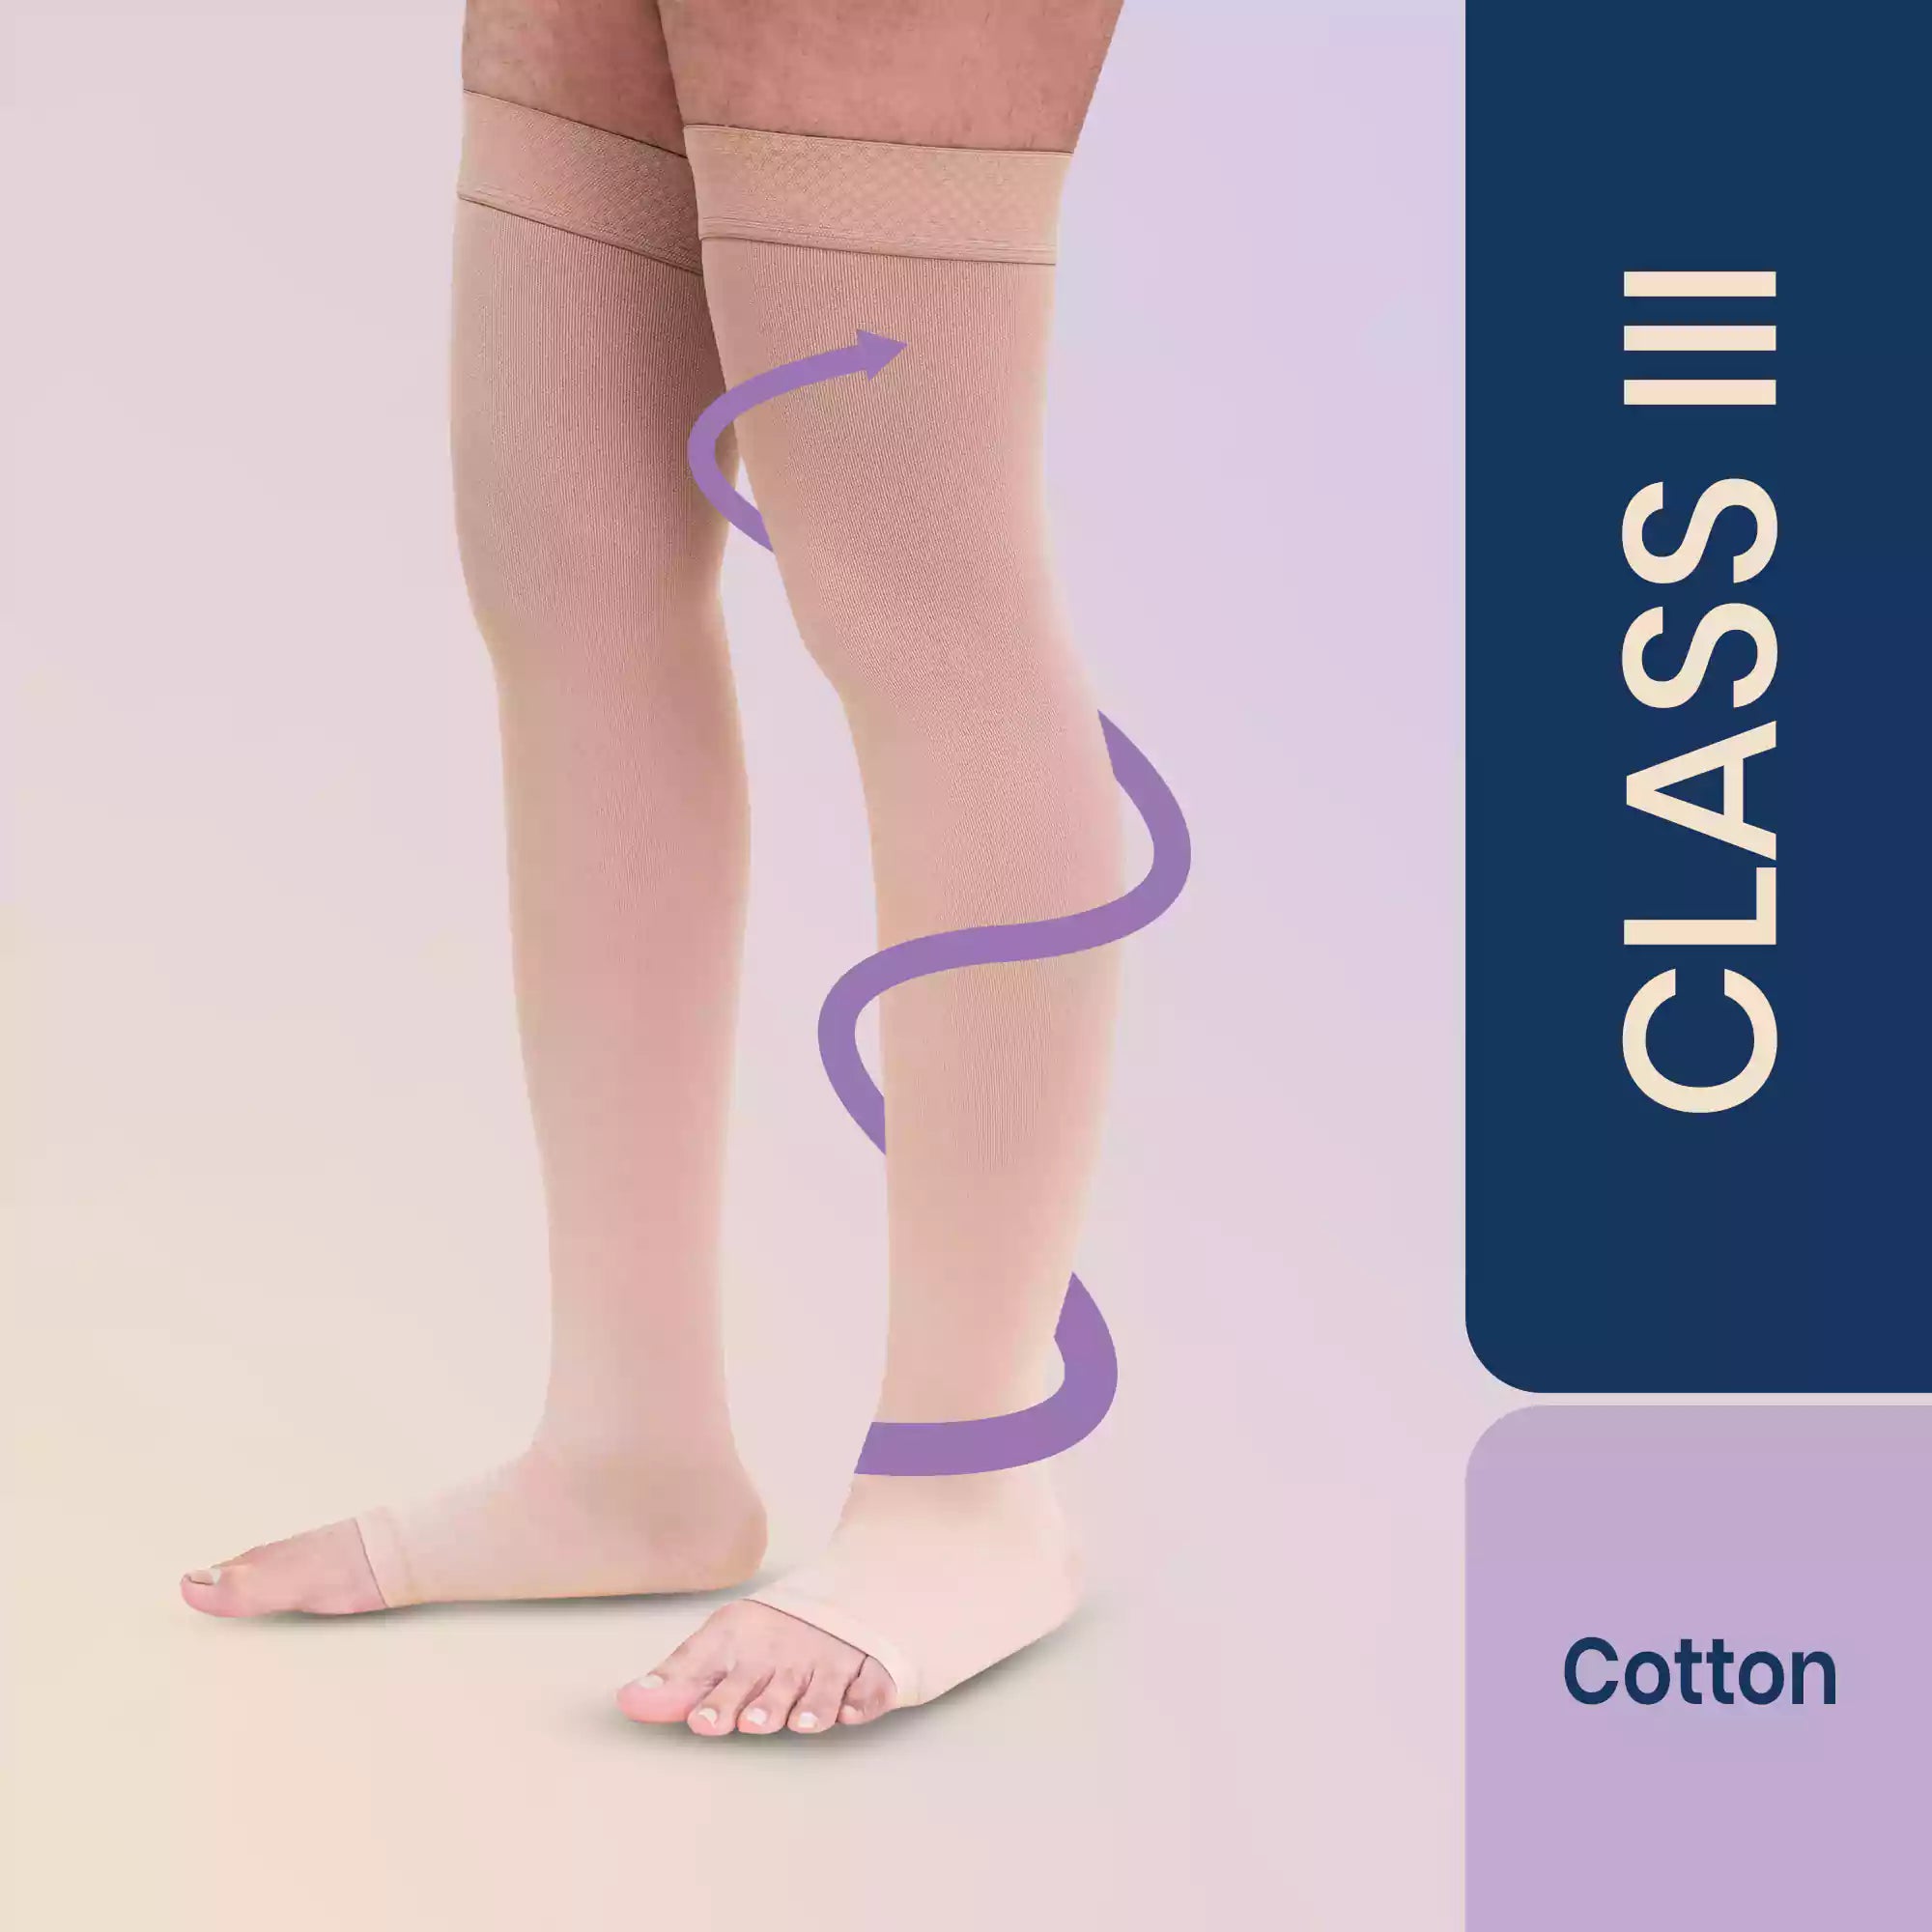 Class 3 Knee Length Graduated Compression Stockings – Technomed